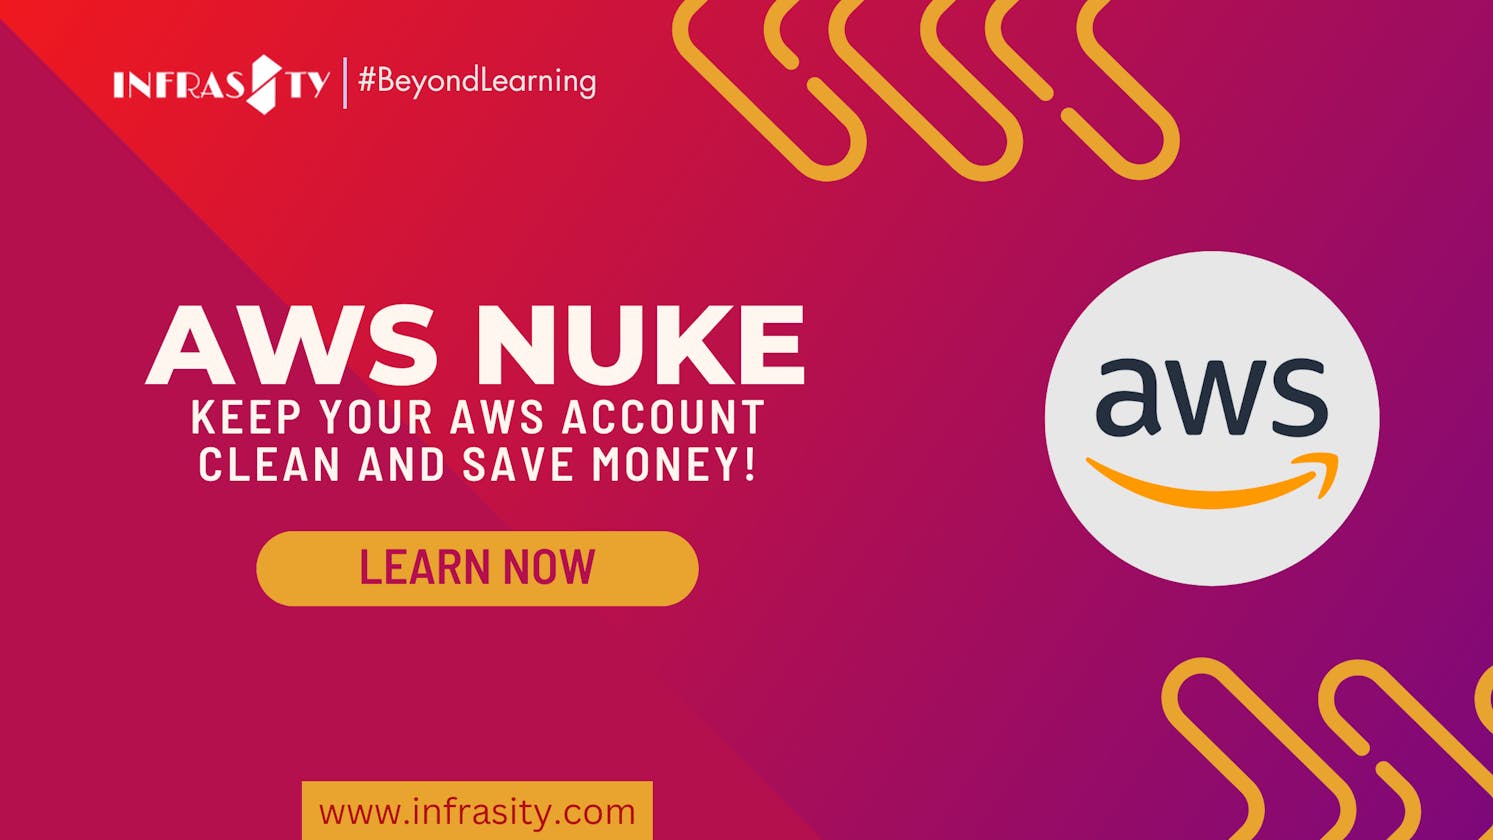 AWS Nuke: Keep Your AWS Account Clean and Save Money!